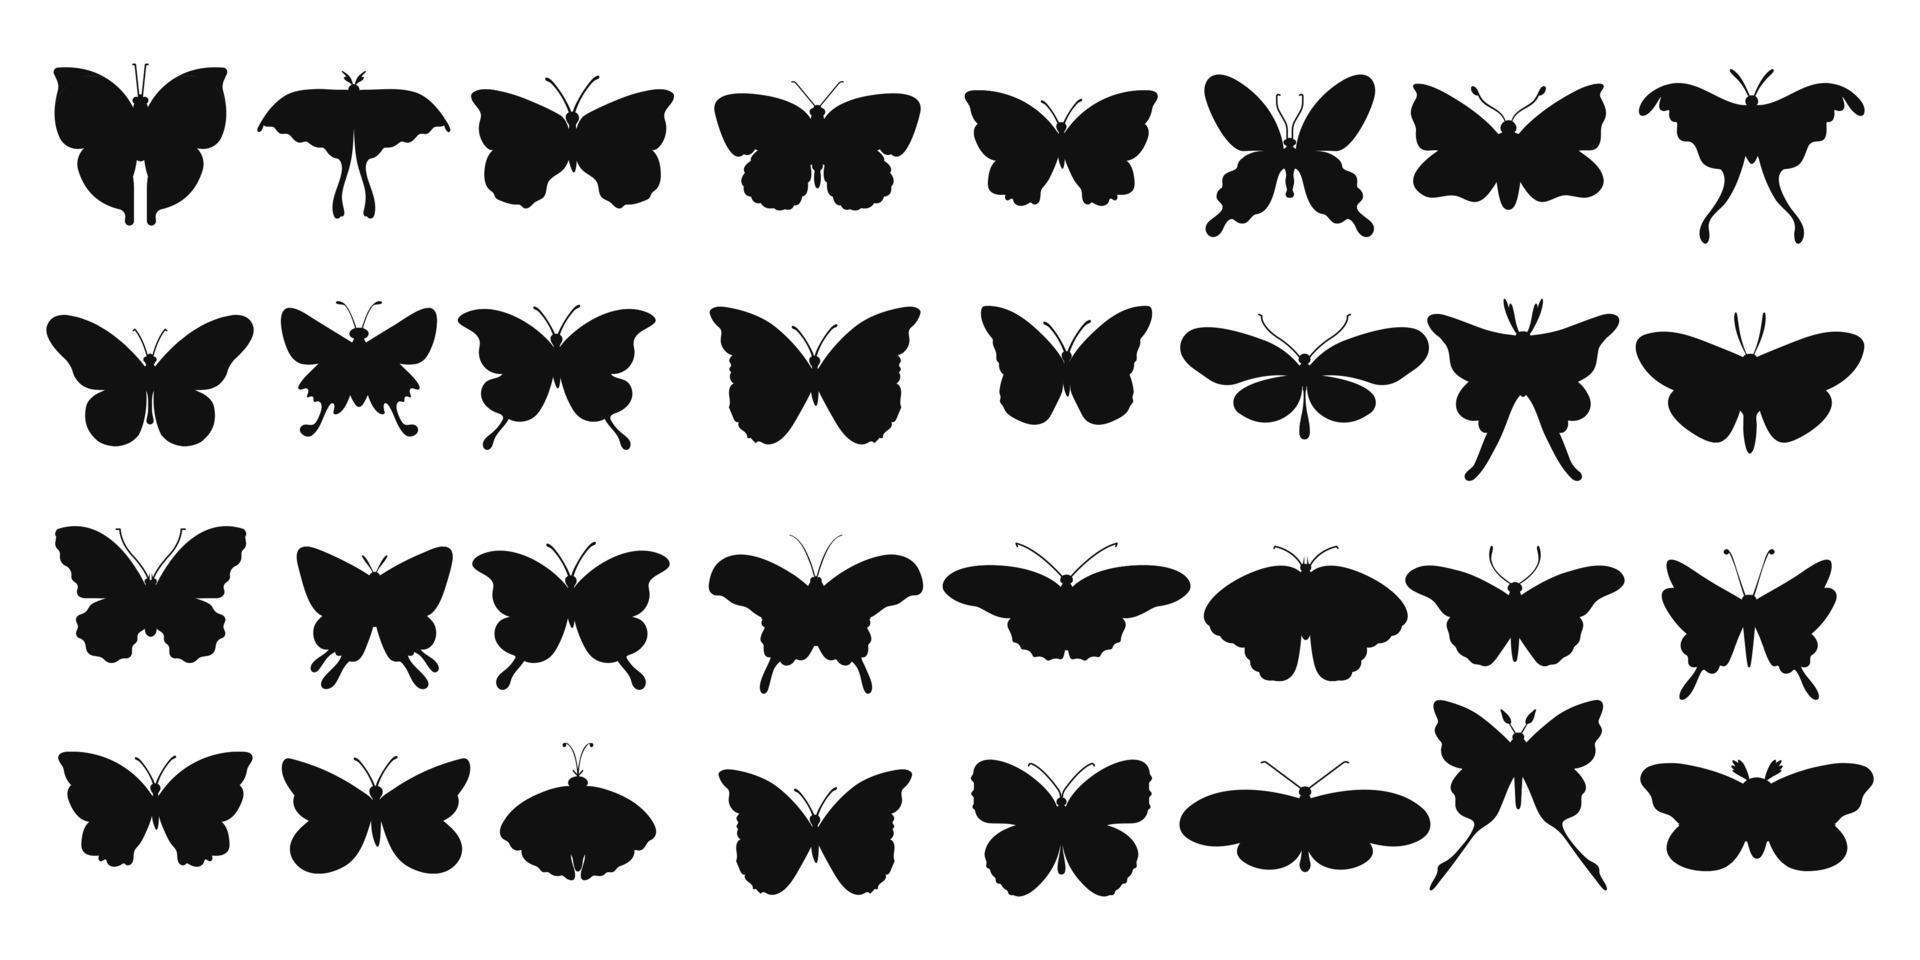 Big collection silhouette black butterflies for design isolated on white vector